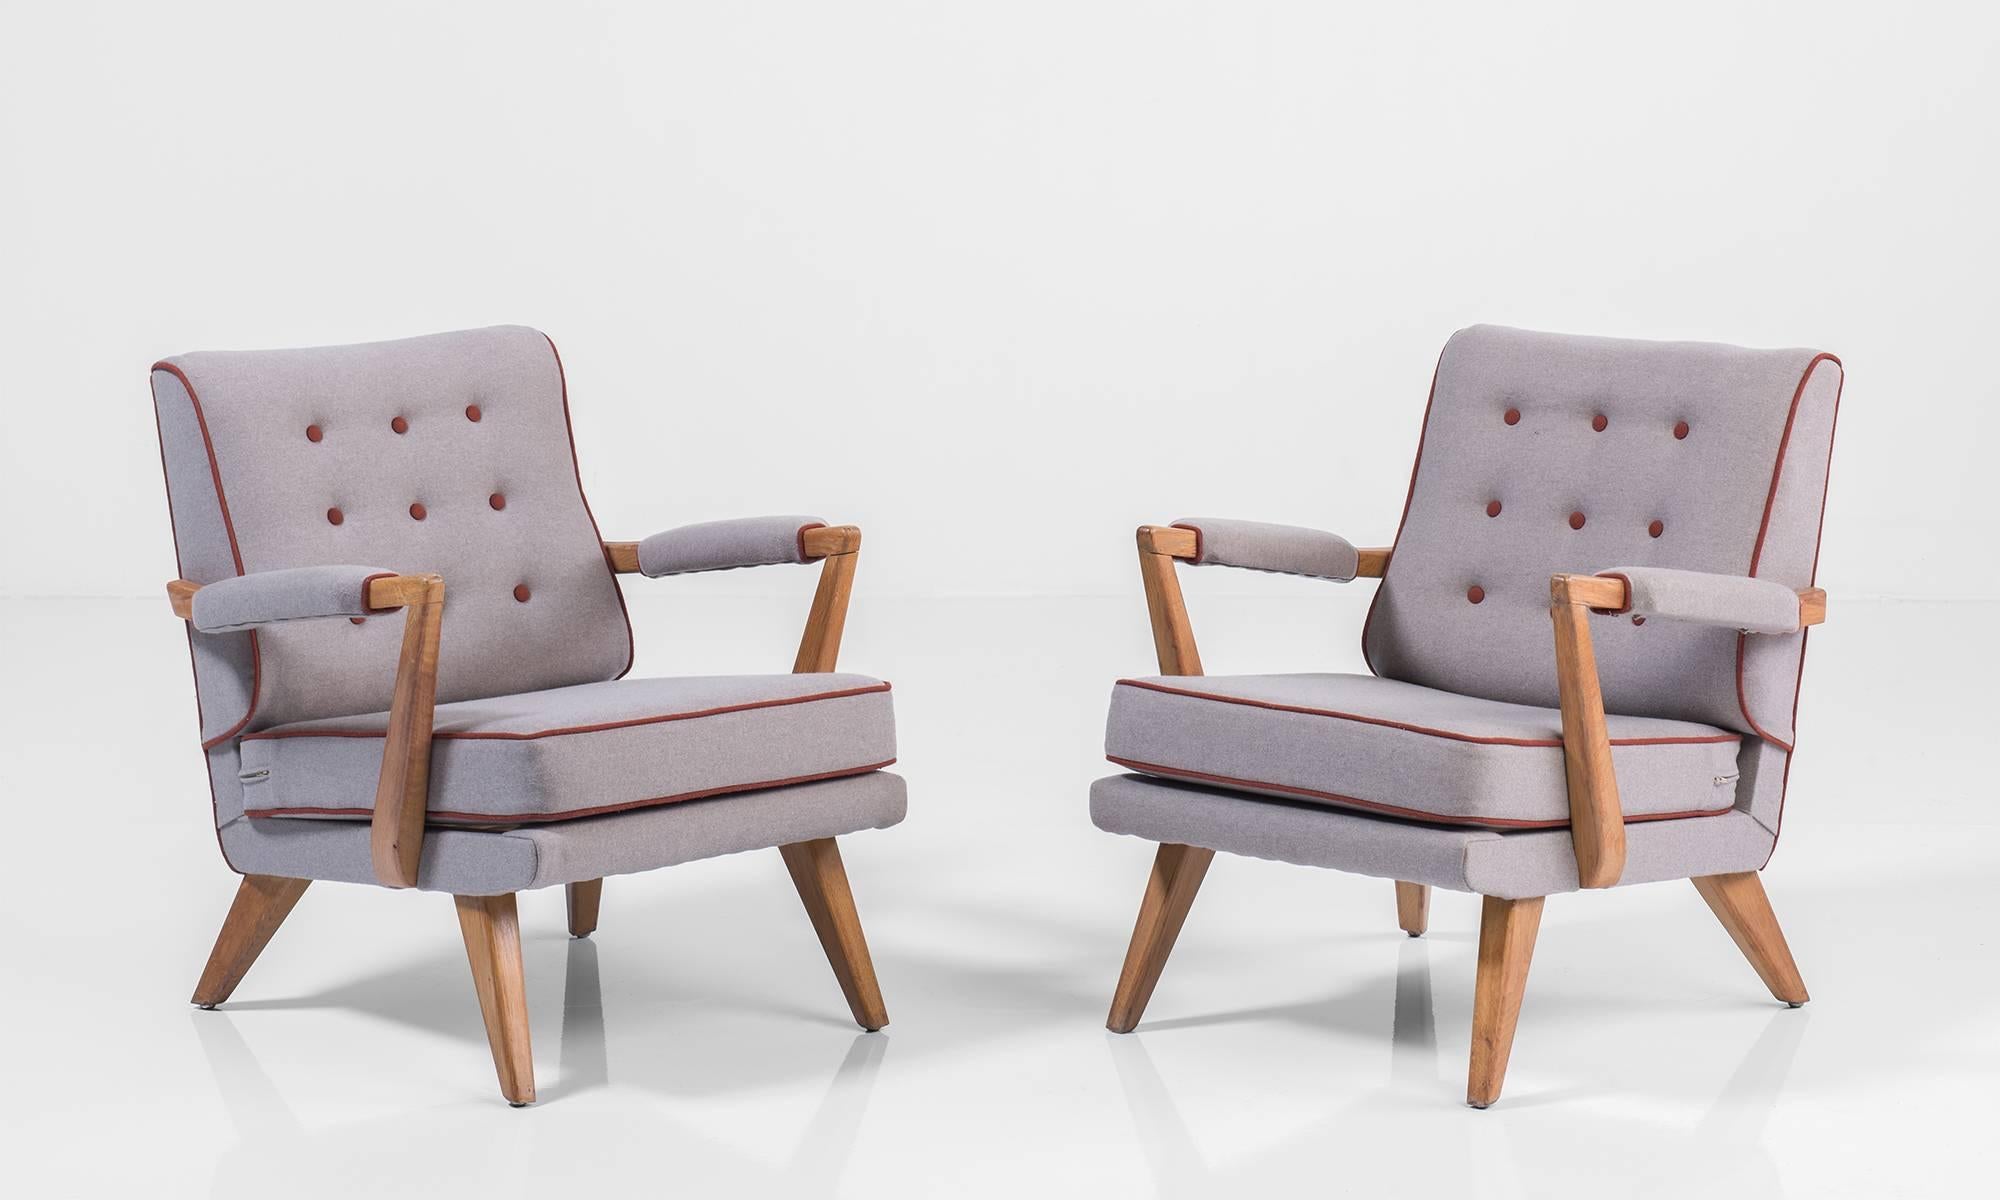 Upholstered modern oak armchairs, circa 1950.

With maroon piping. Elegant form with beautiful upholstery.